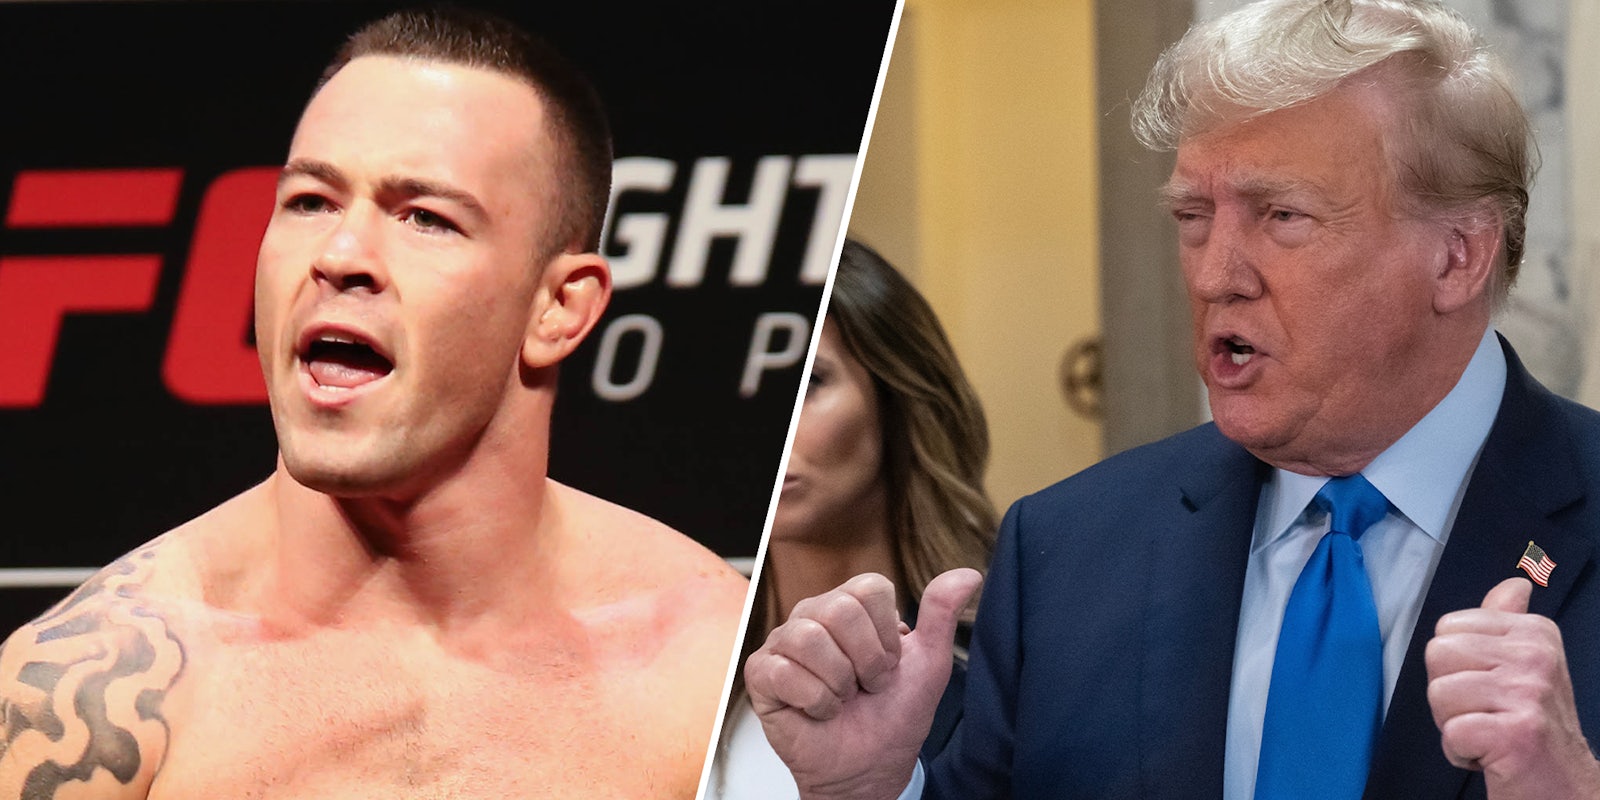 UFC fighter Colby Covington says he lost because he supports Trump